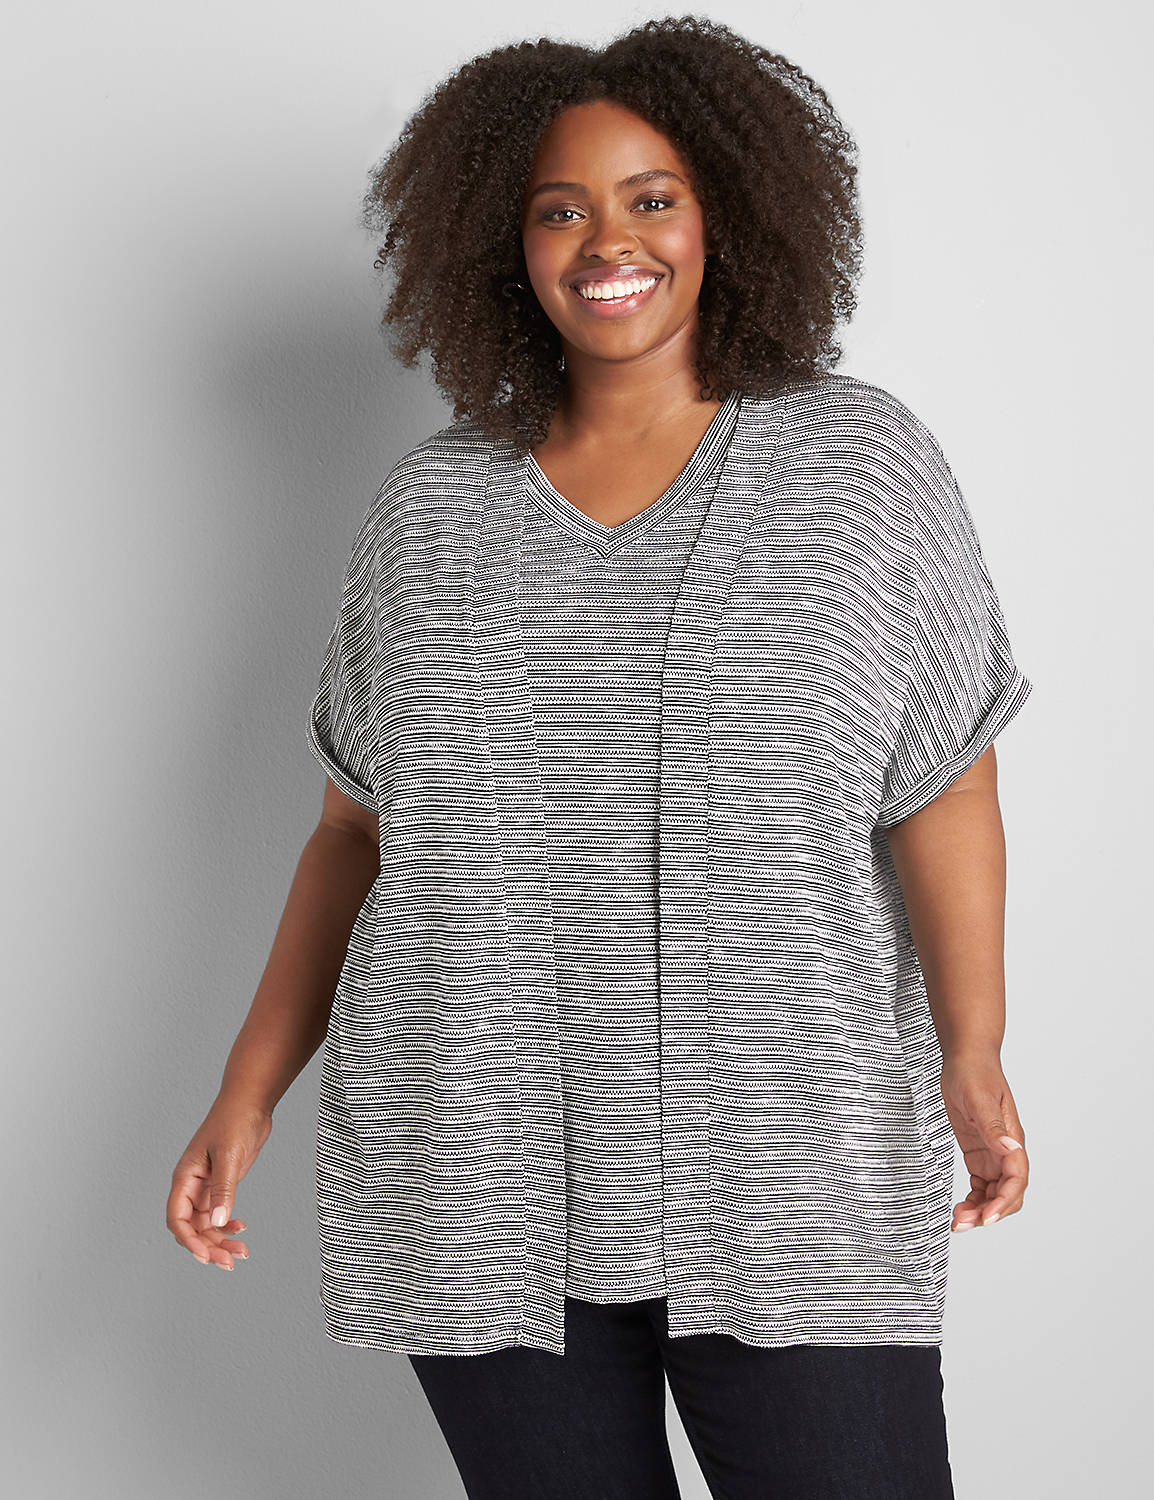 Cuffed Dolman-Sleeve Overpiece Product Image 1